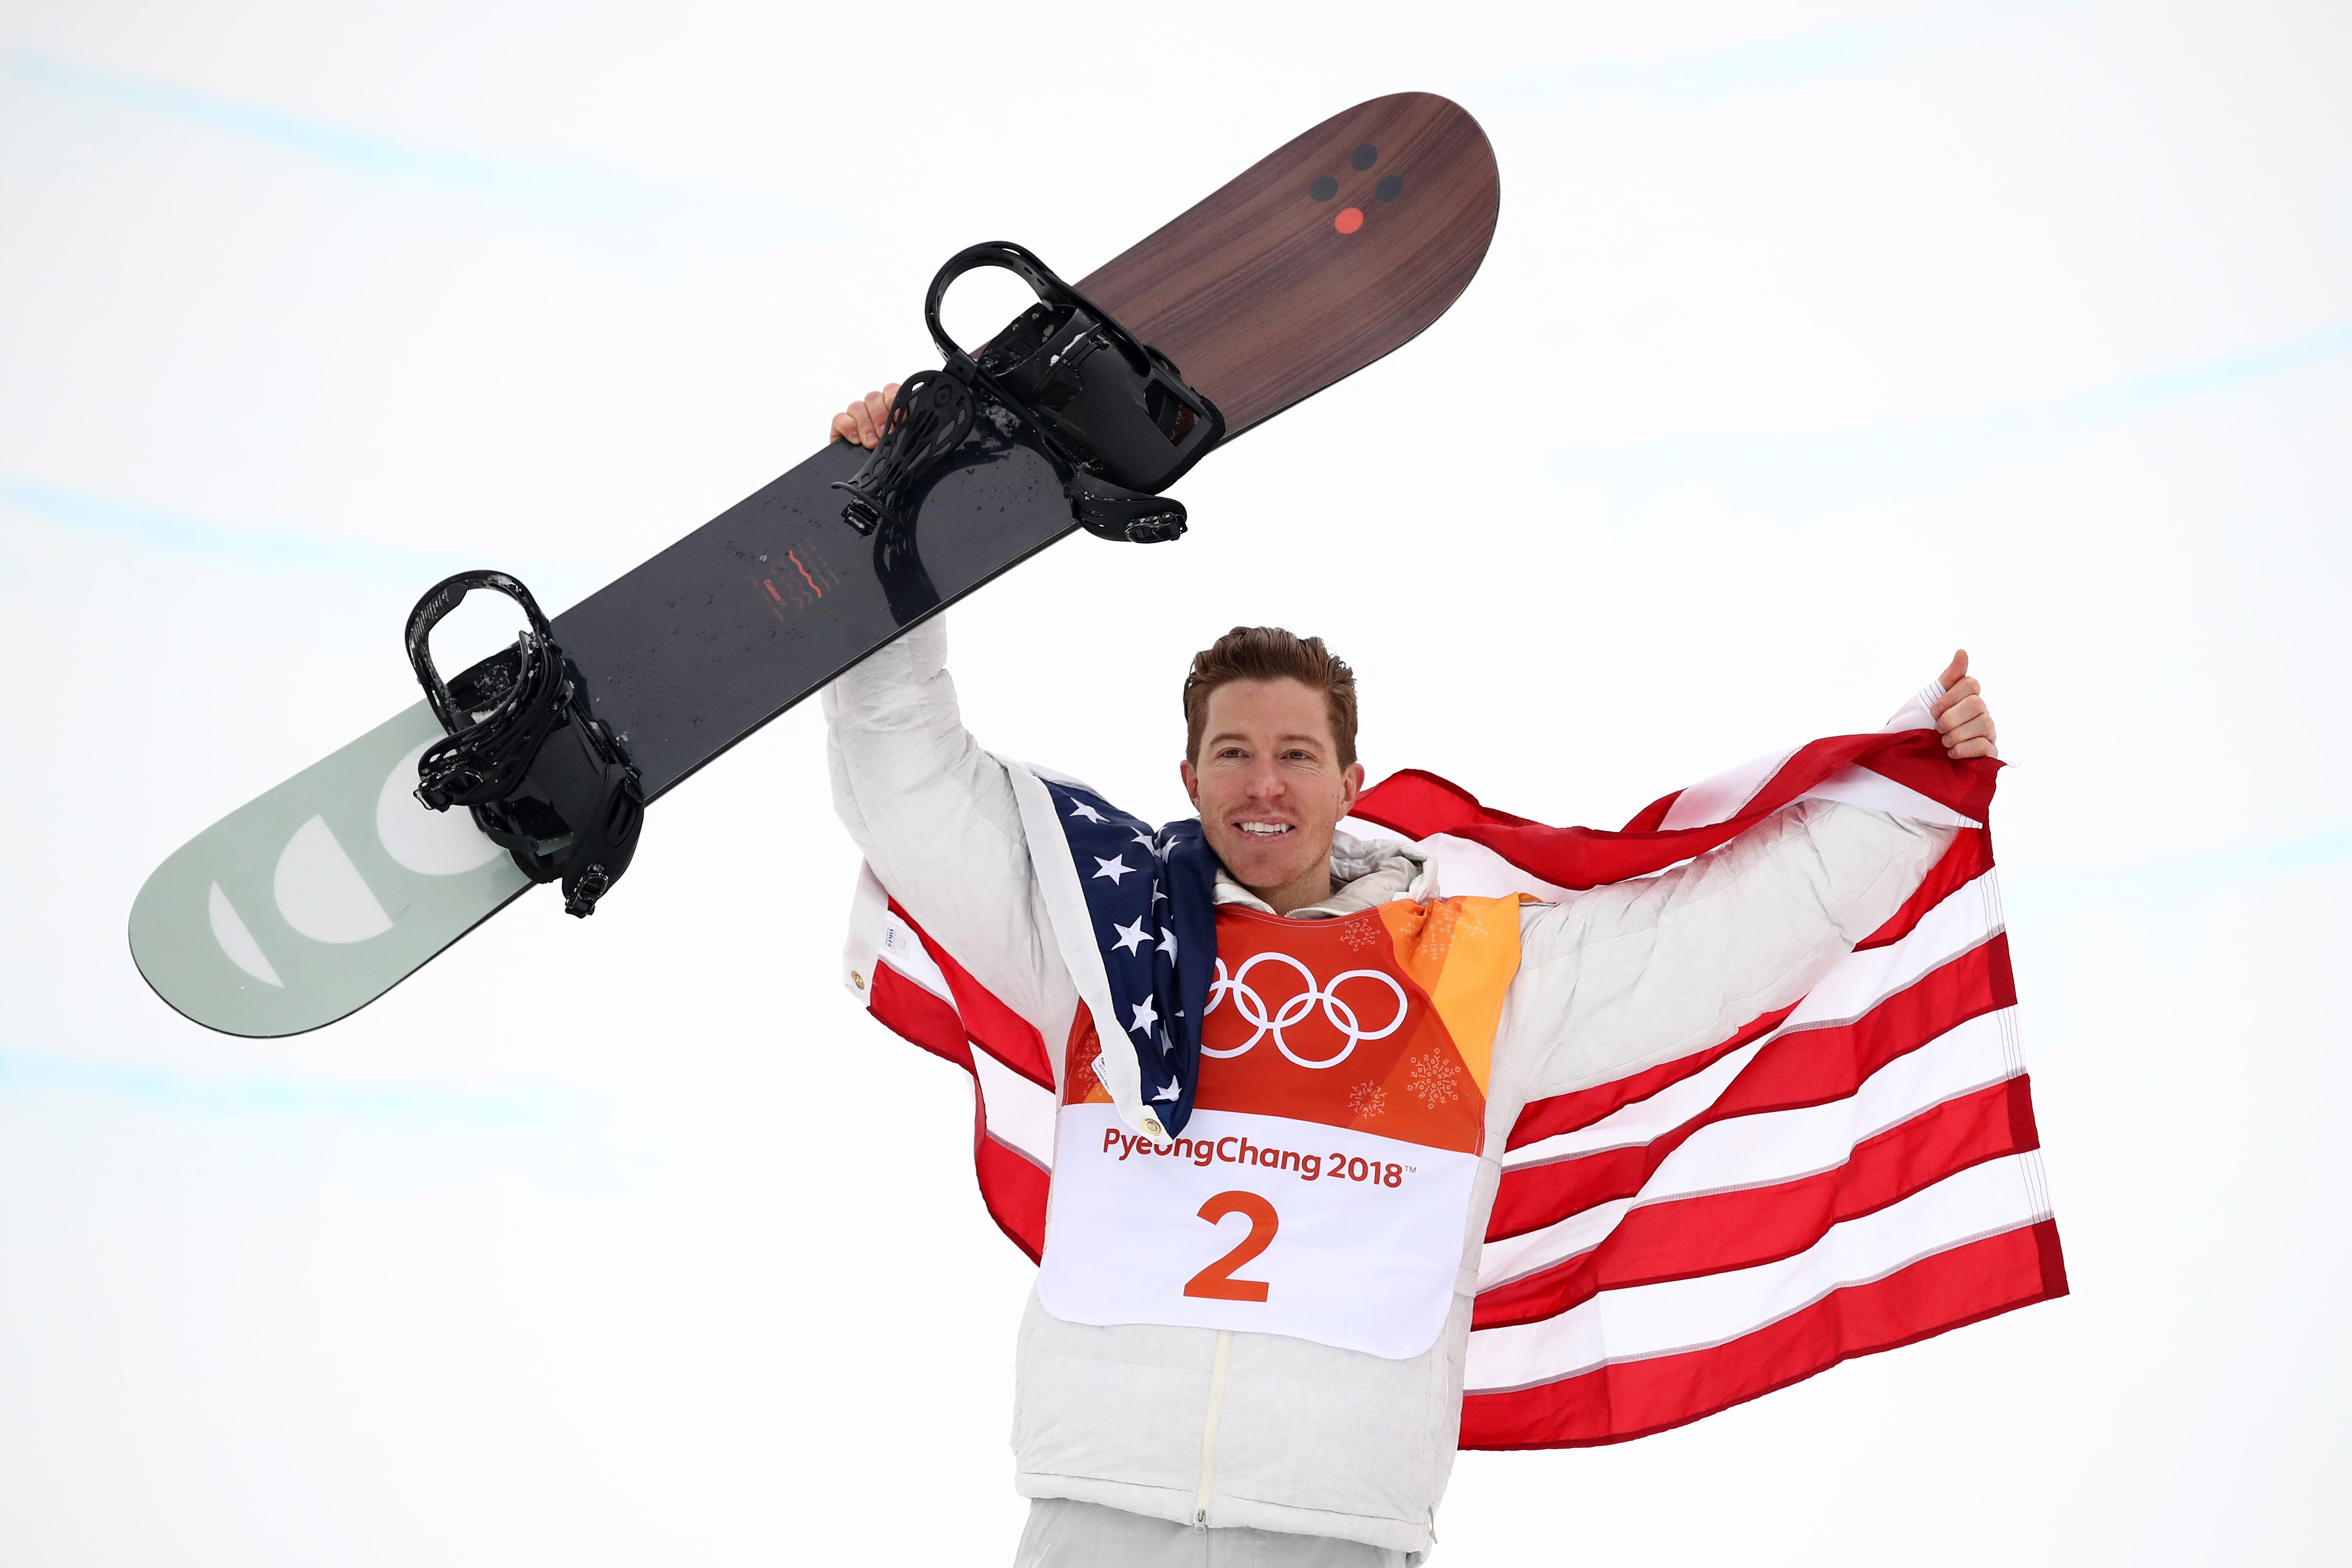 Shaun White poses with the American Flag and his snowboard at PyeongChang 2018 Winter Olympics